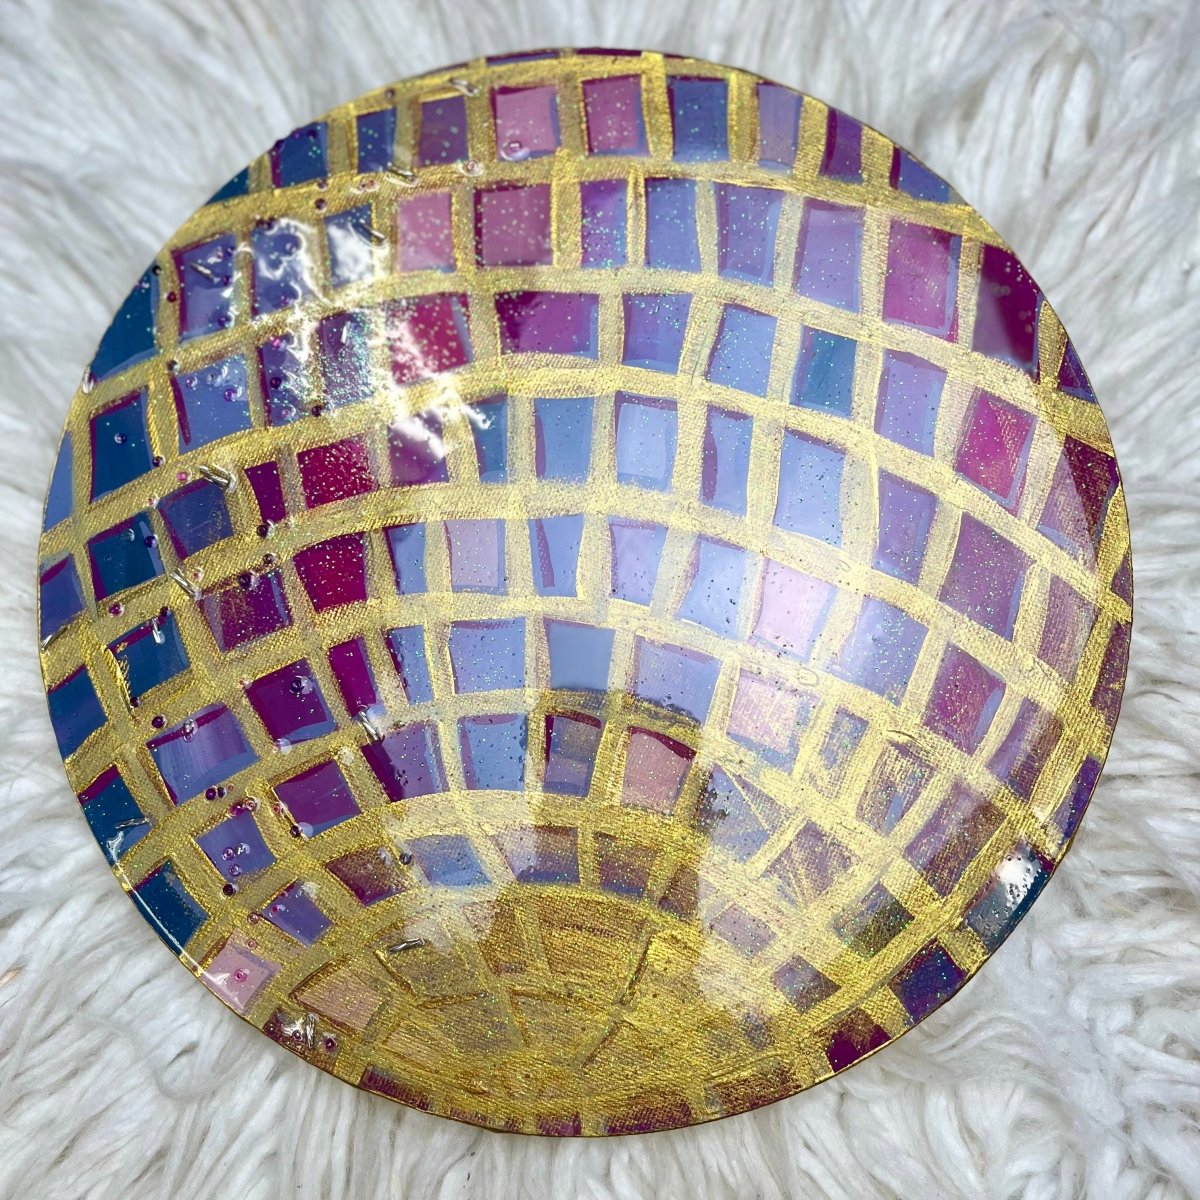 10" Disco Ball Art by Abi - Miles and Bishop